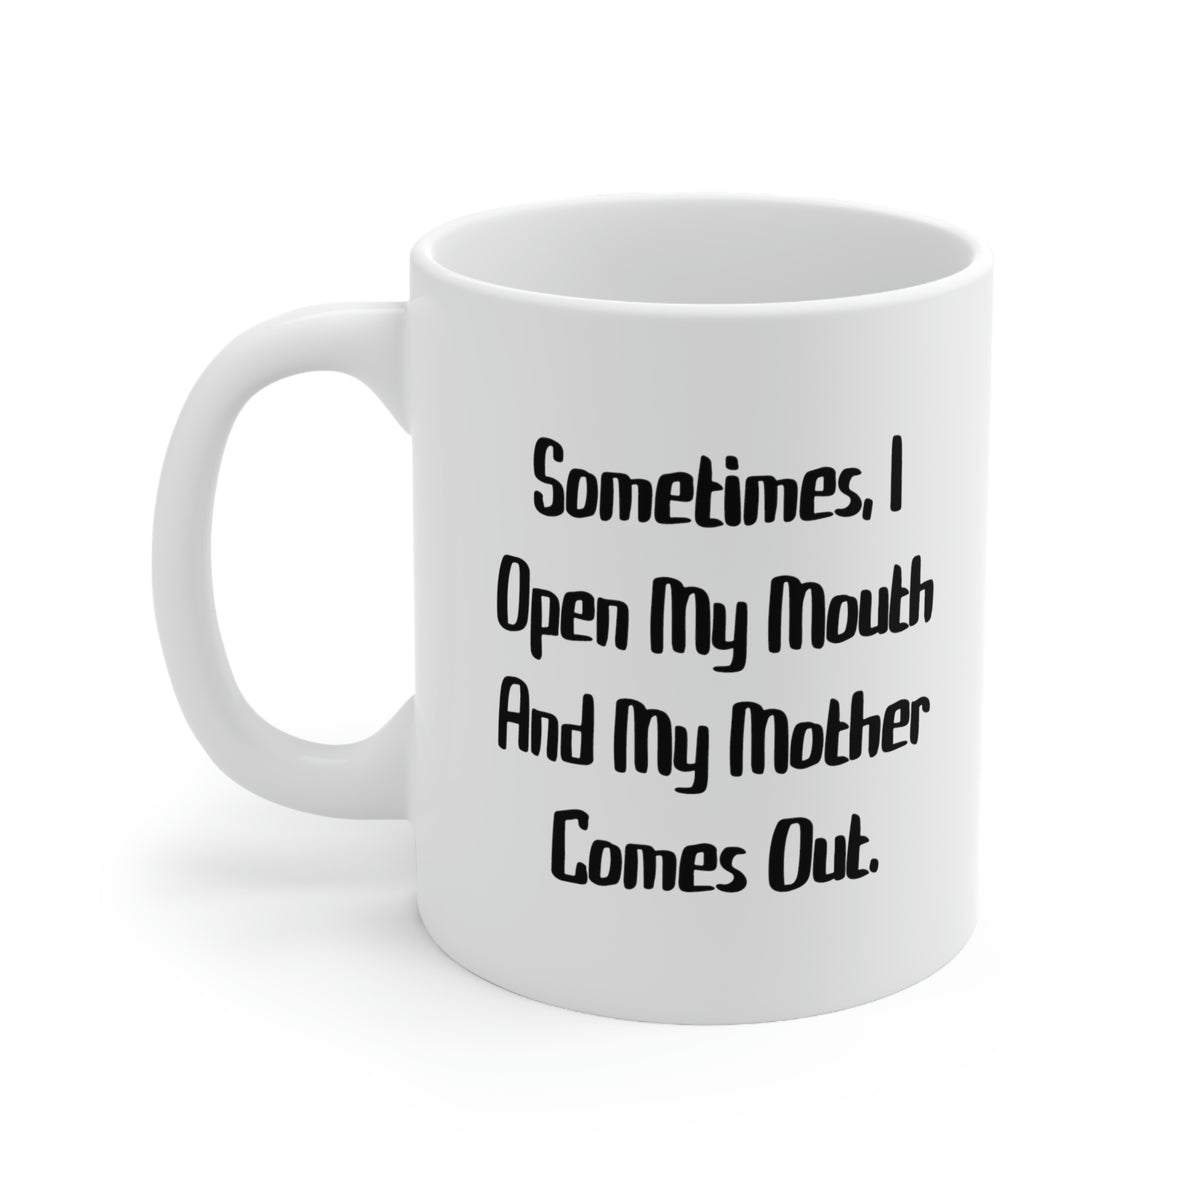 Sometimes, I Open My Mouth And My Mother Comes Out. Mother 11oz Mug, Cute Mother, Cup For Mom